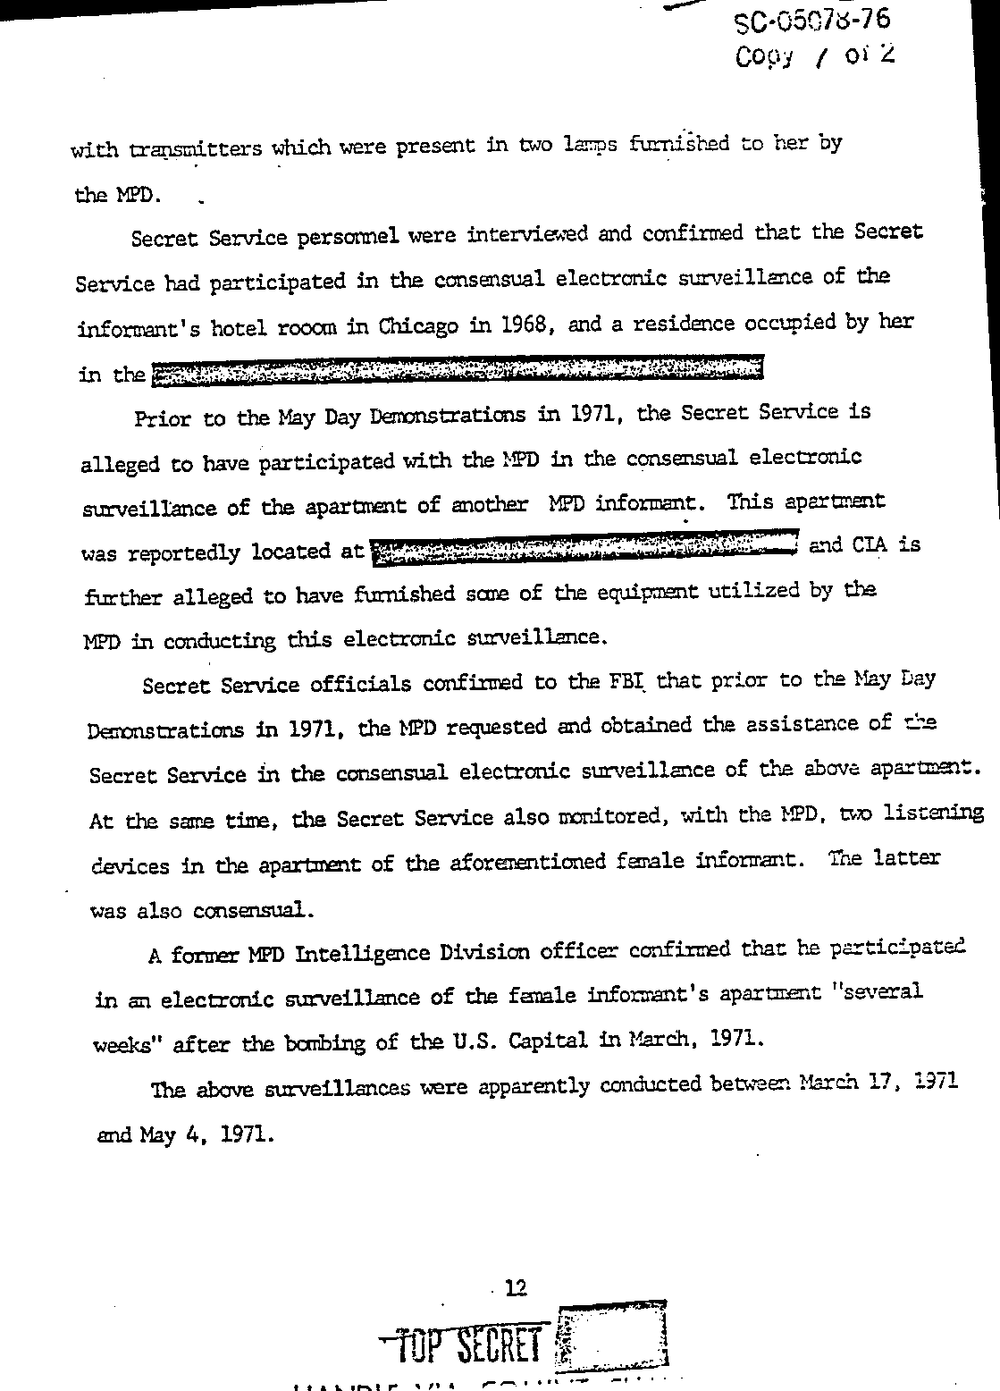 Page 20 from Report on Inquiry Into CIA Related Electronic Surveillance Activities